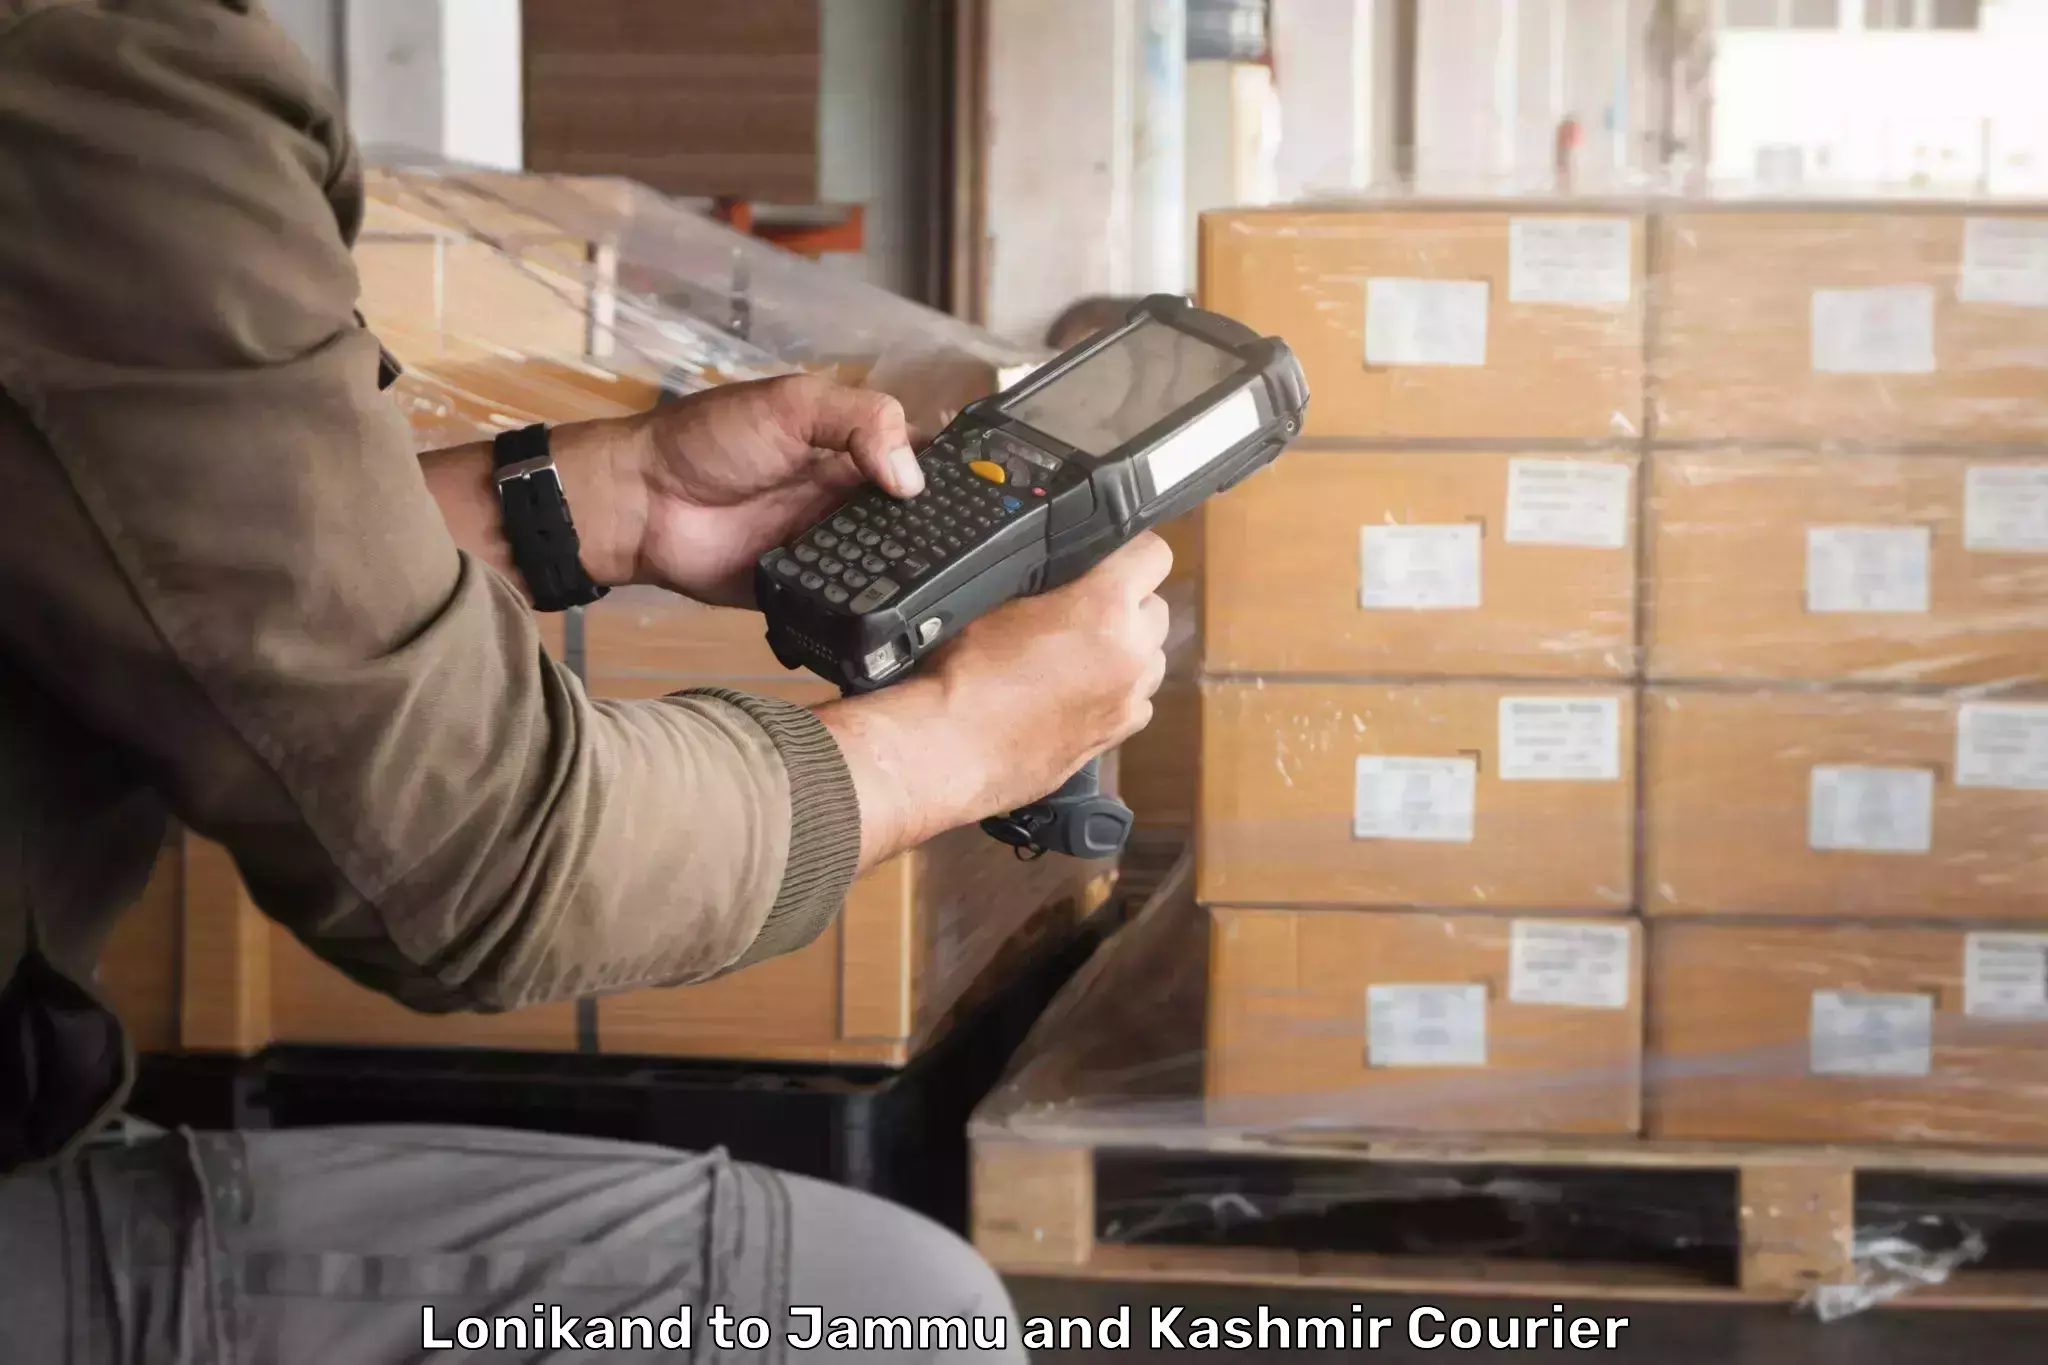 State-of-the-art courier technology Lonikand to Jammu and Kashmir